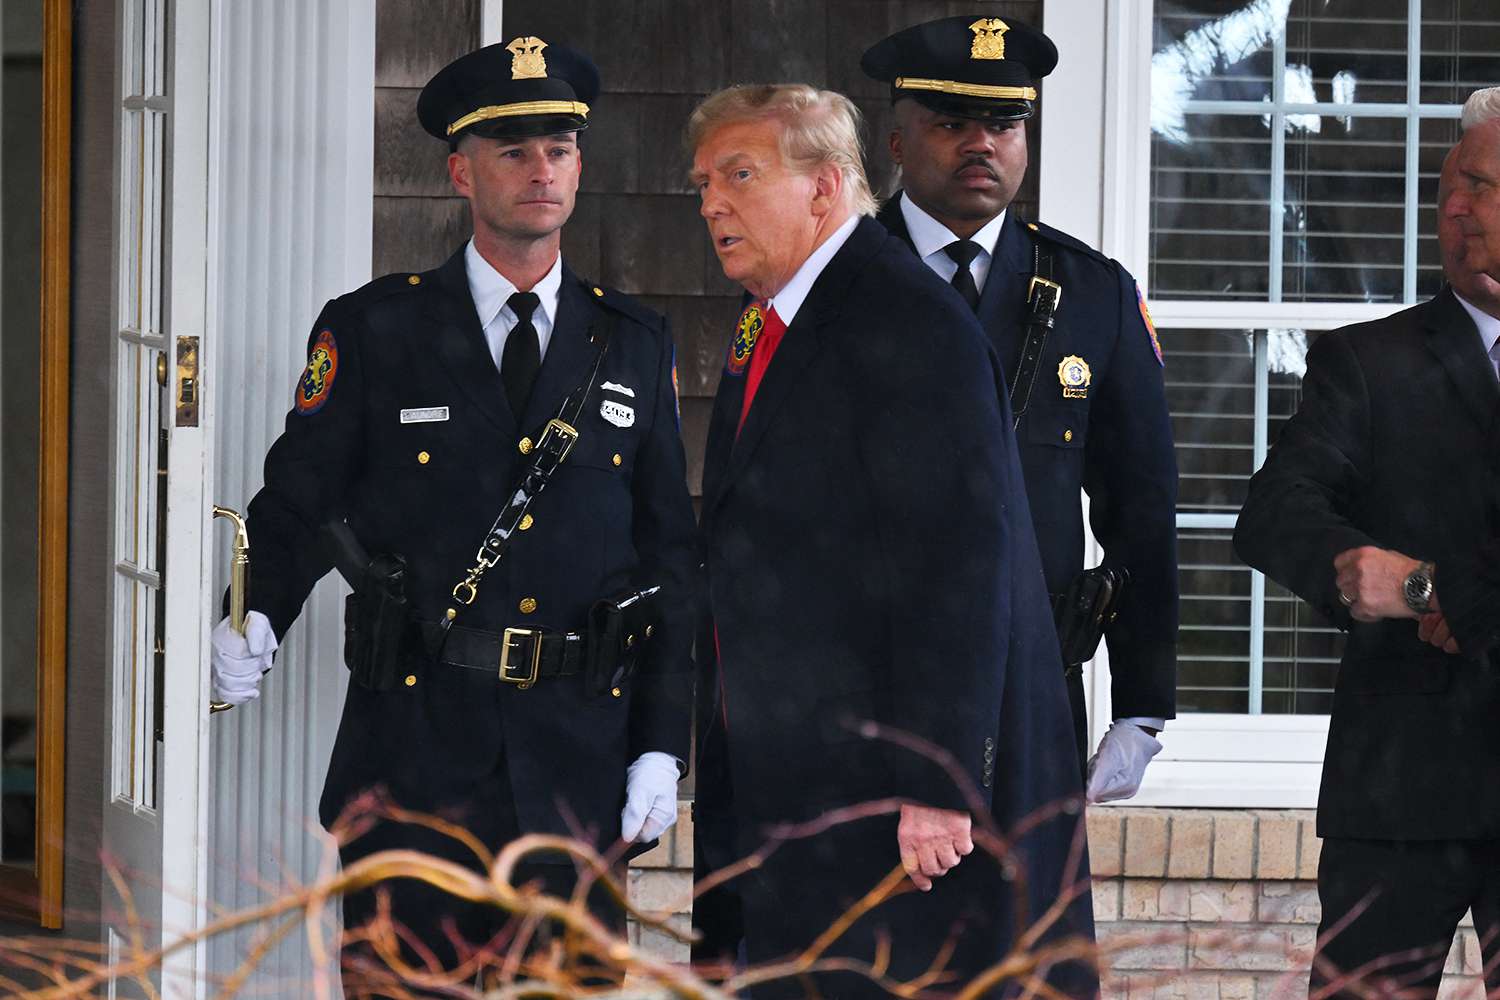 Former US President Donald Trump (C) arrives for the wake for New York Police Department (NYPD) Officer Jonathan Diller in Massapequa, Long Island, New York, on March 28, 2024. Diller was part of the NYPD's Critical Response Team when he was gunned down during a traffic stop in Queens on the night of March 25.